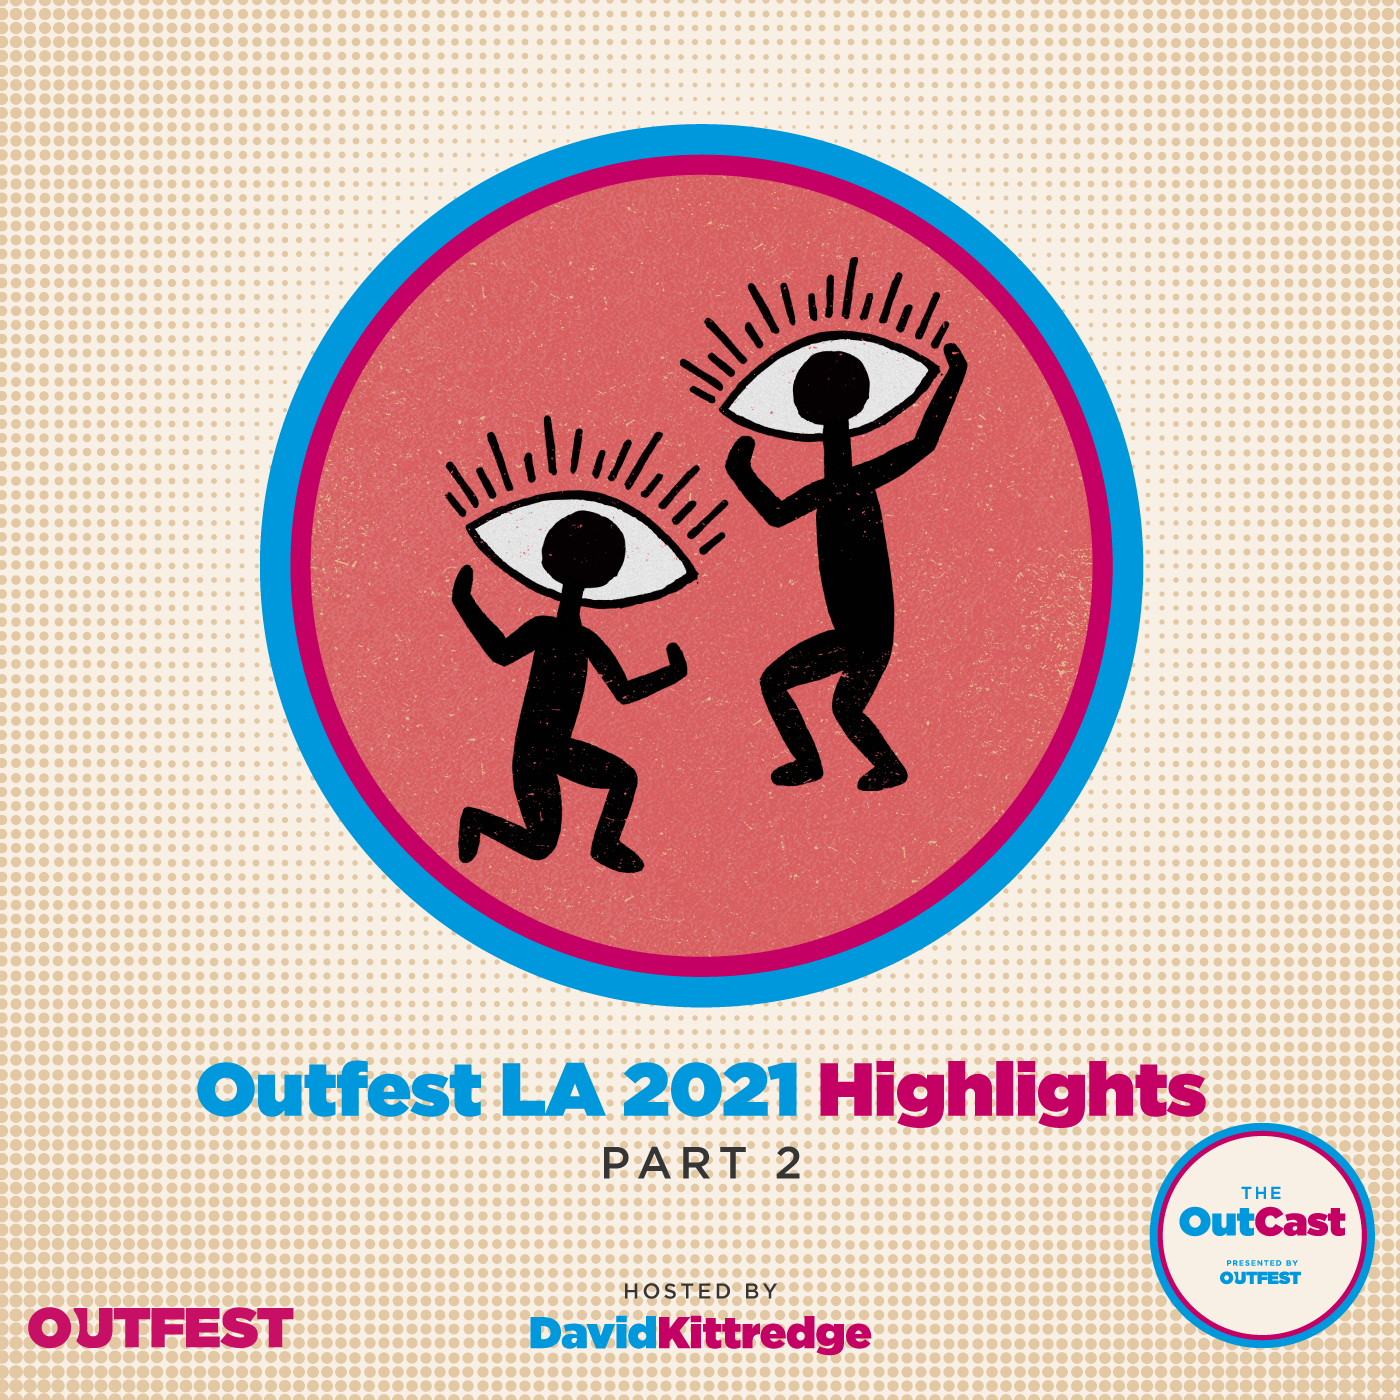 Artwork for podcast The OutCast Presented by Outfest